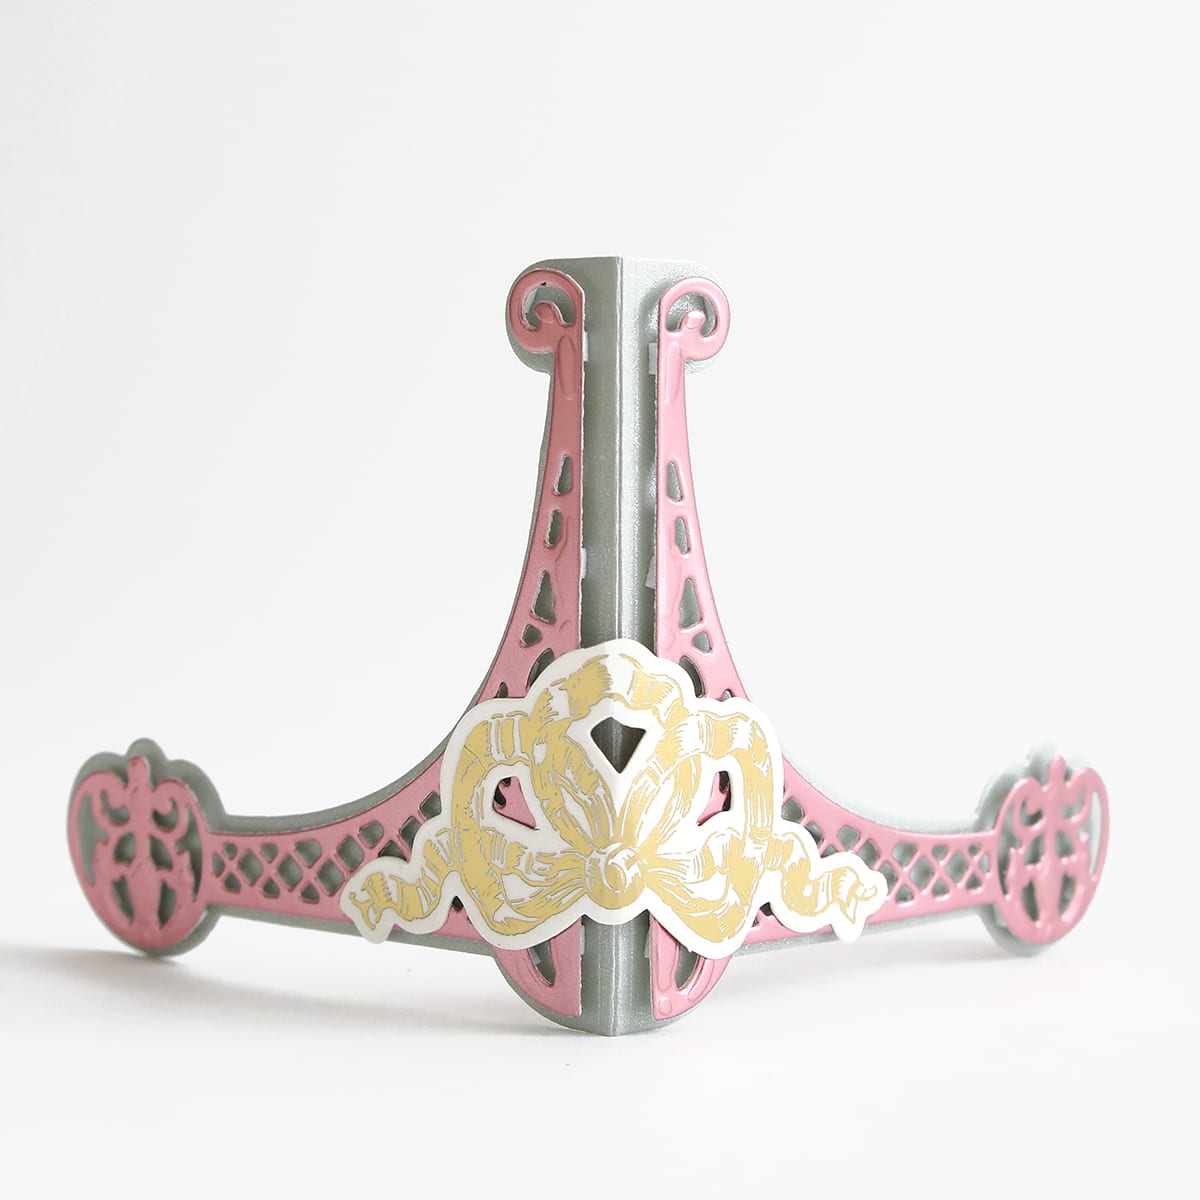 a pink and gold decorative object on a white background.